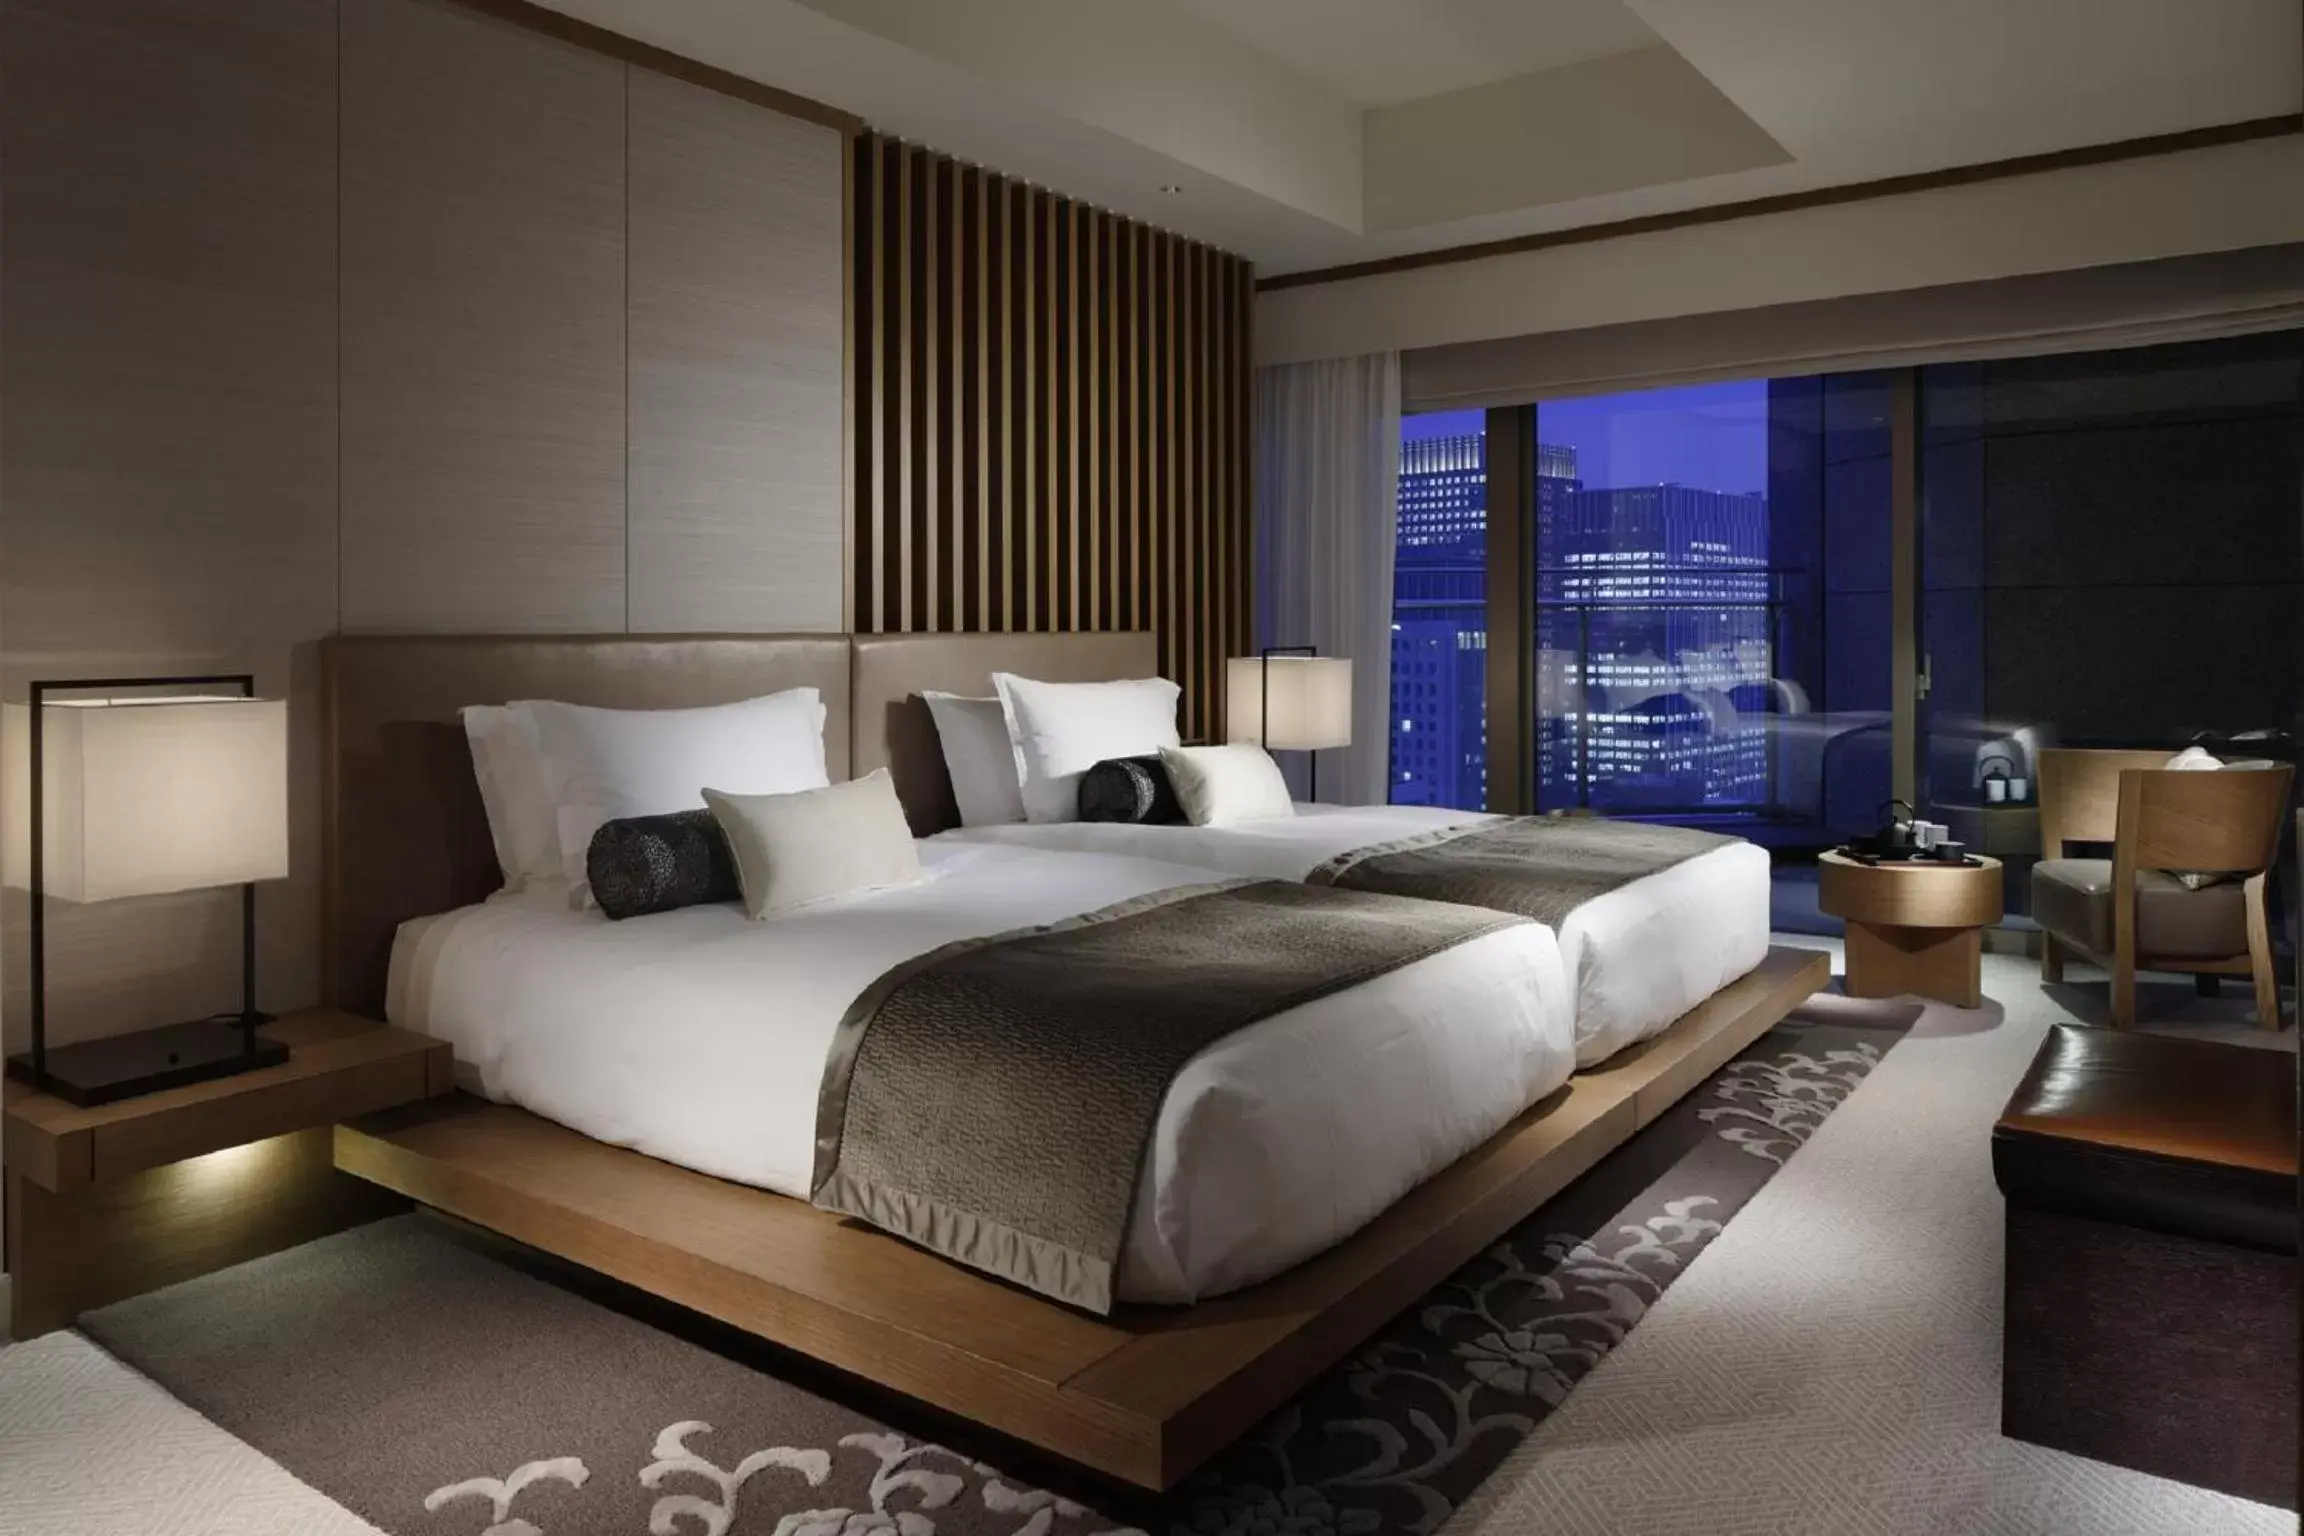 Chiyoda Suite - single occupancy in Palace Hotel Tokyo